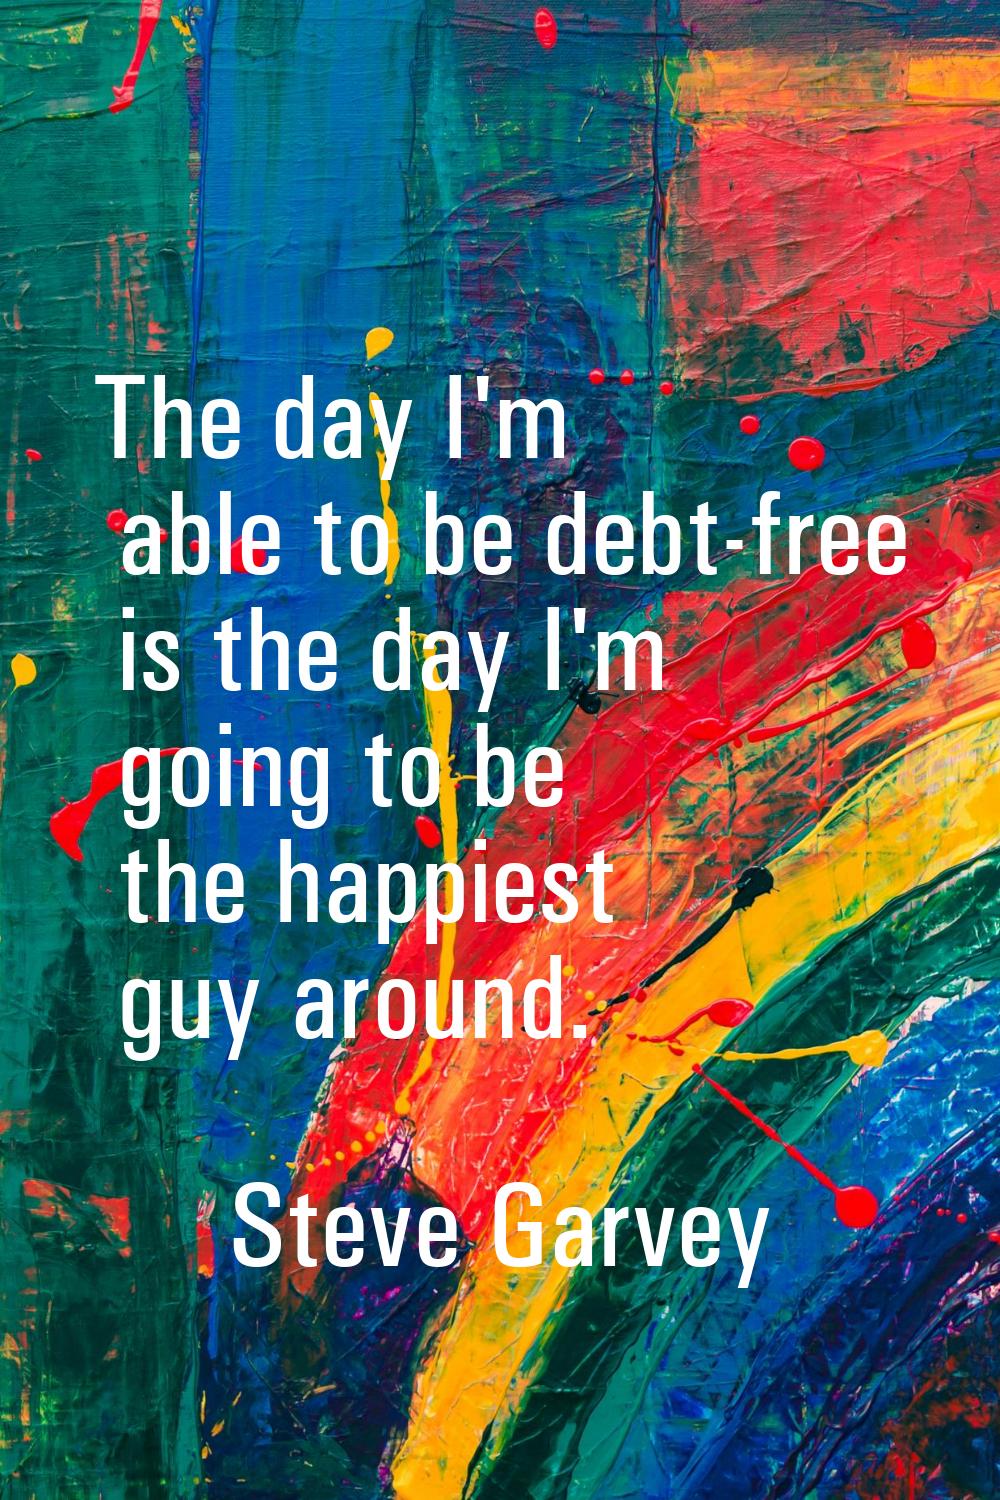 The day I'm able to be debt-free is the day I'm going to be the happiest guy around.